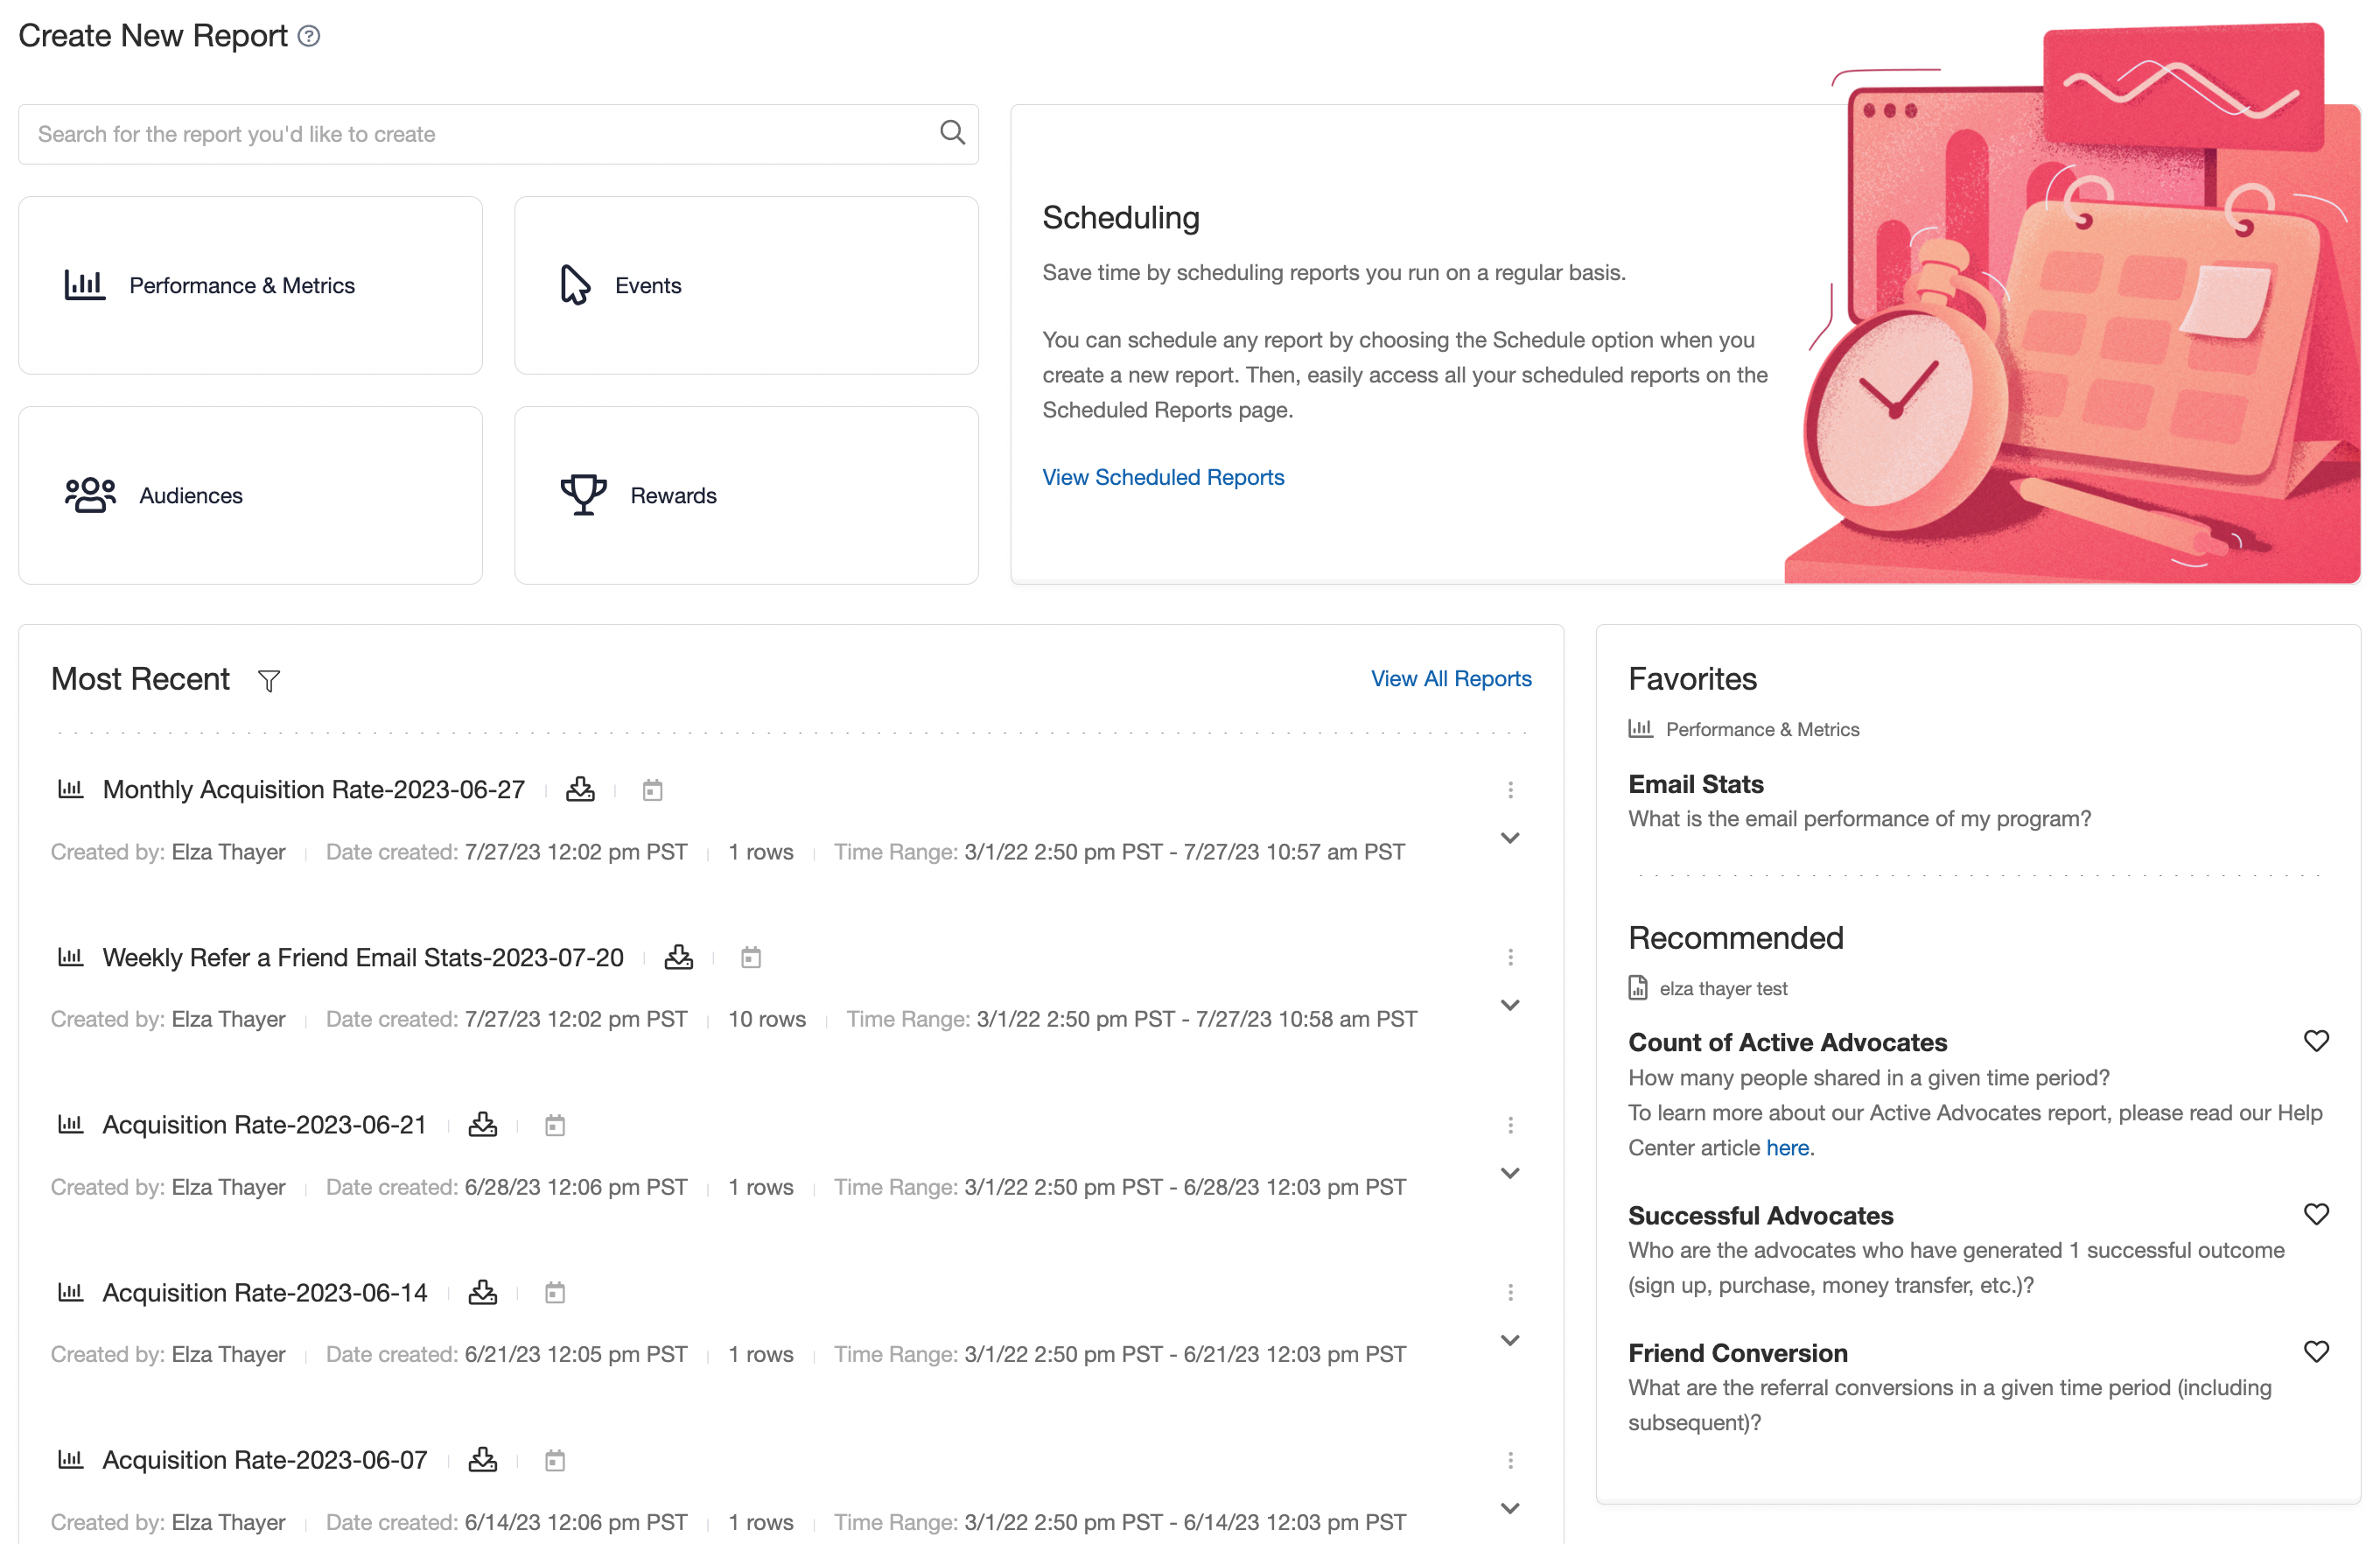 The main Reports page of the Extole platform